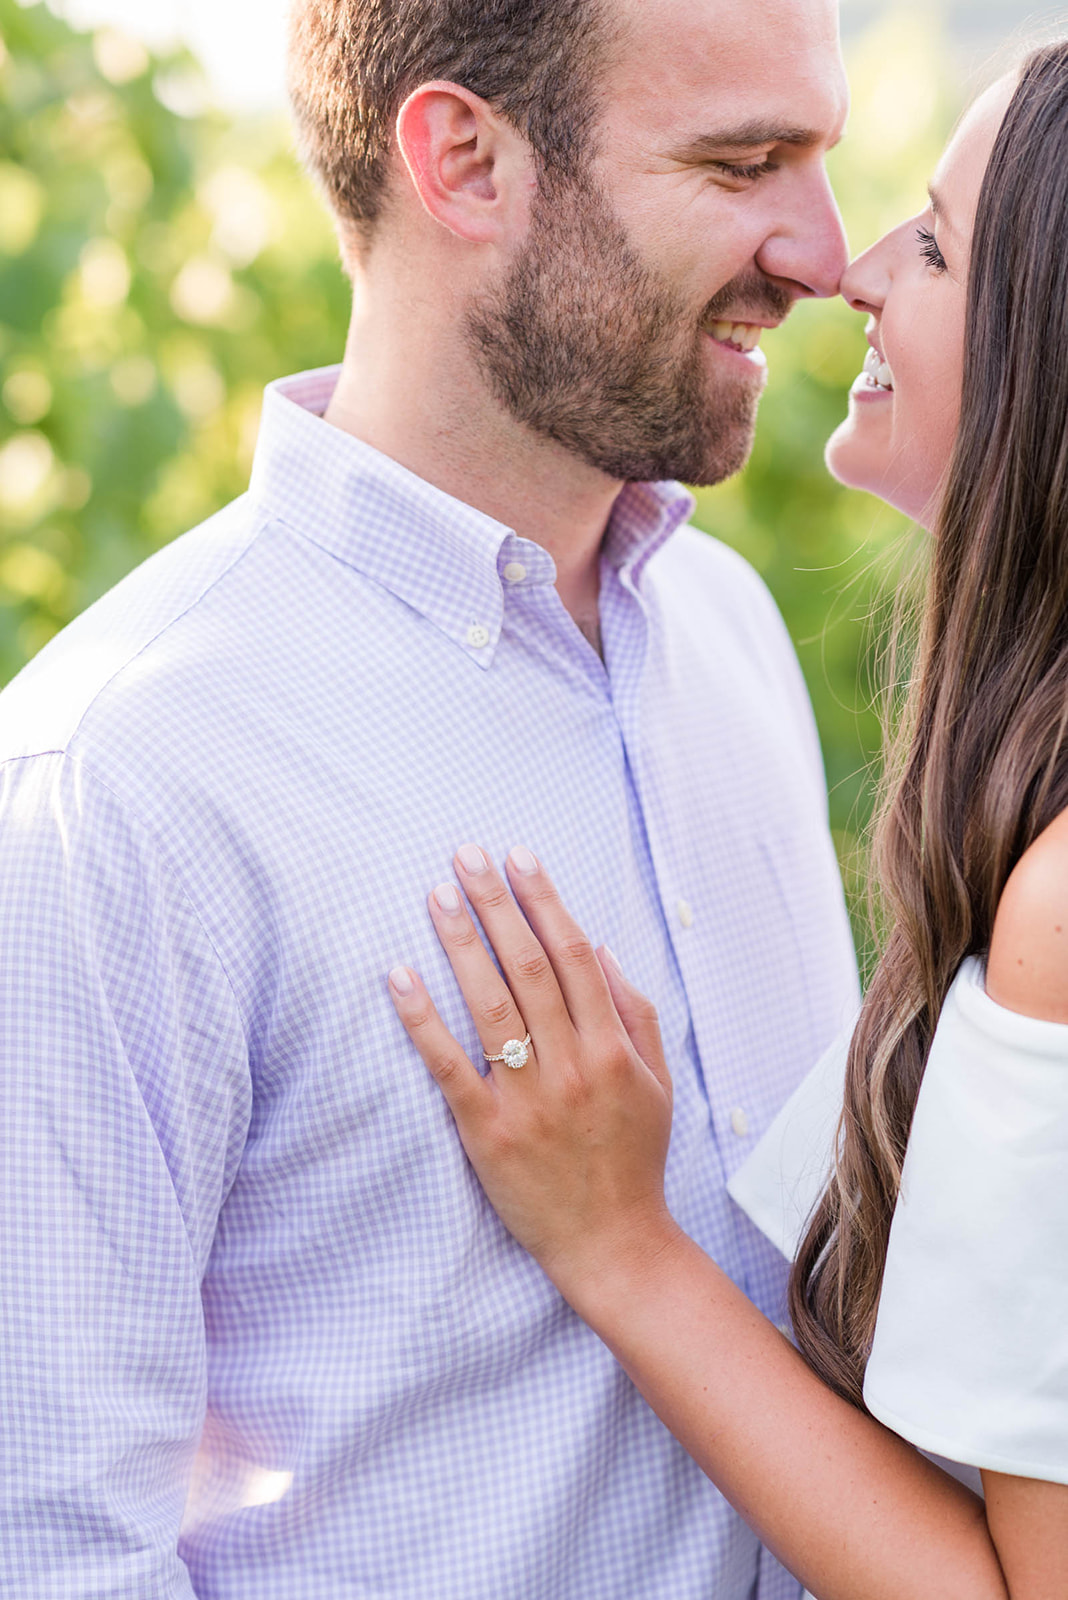 Engagement Session at Arrington Vineyards, Sweet Williams Photography, Nashville Tennessee